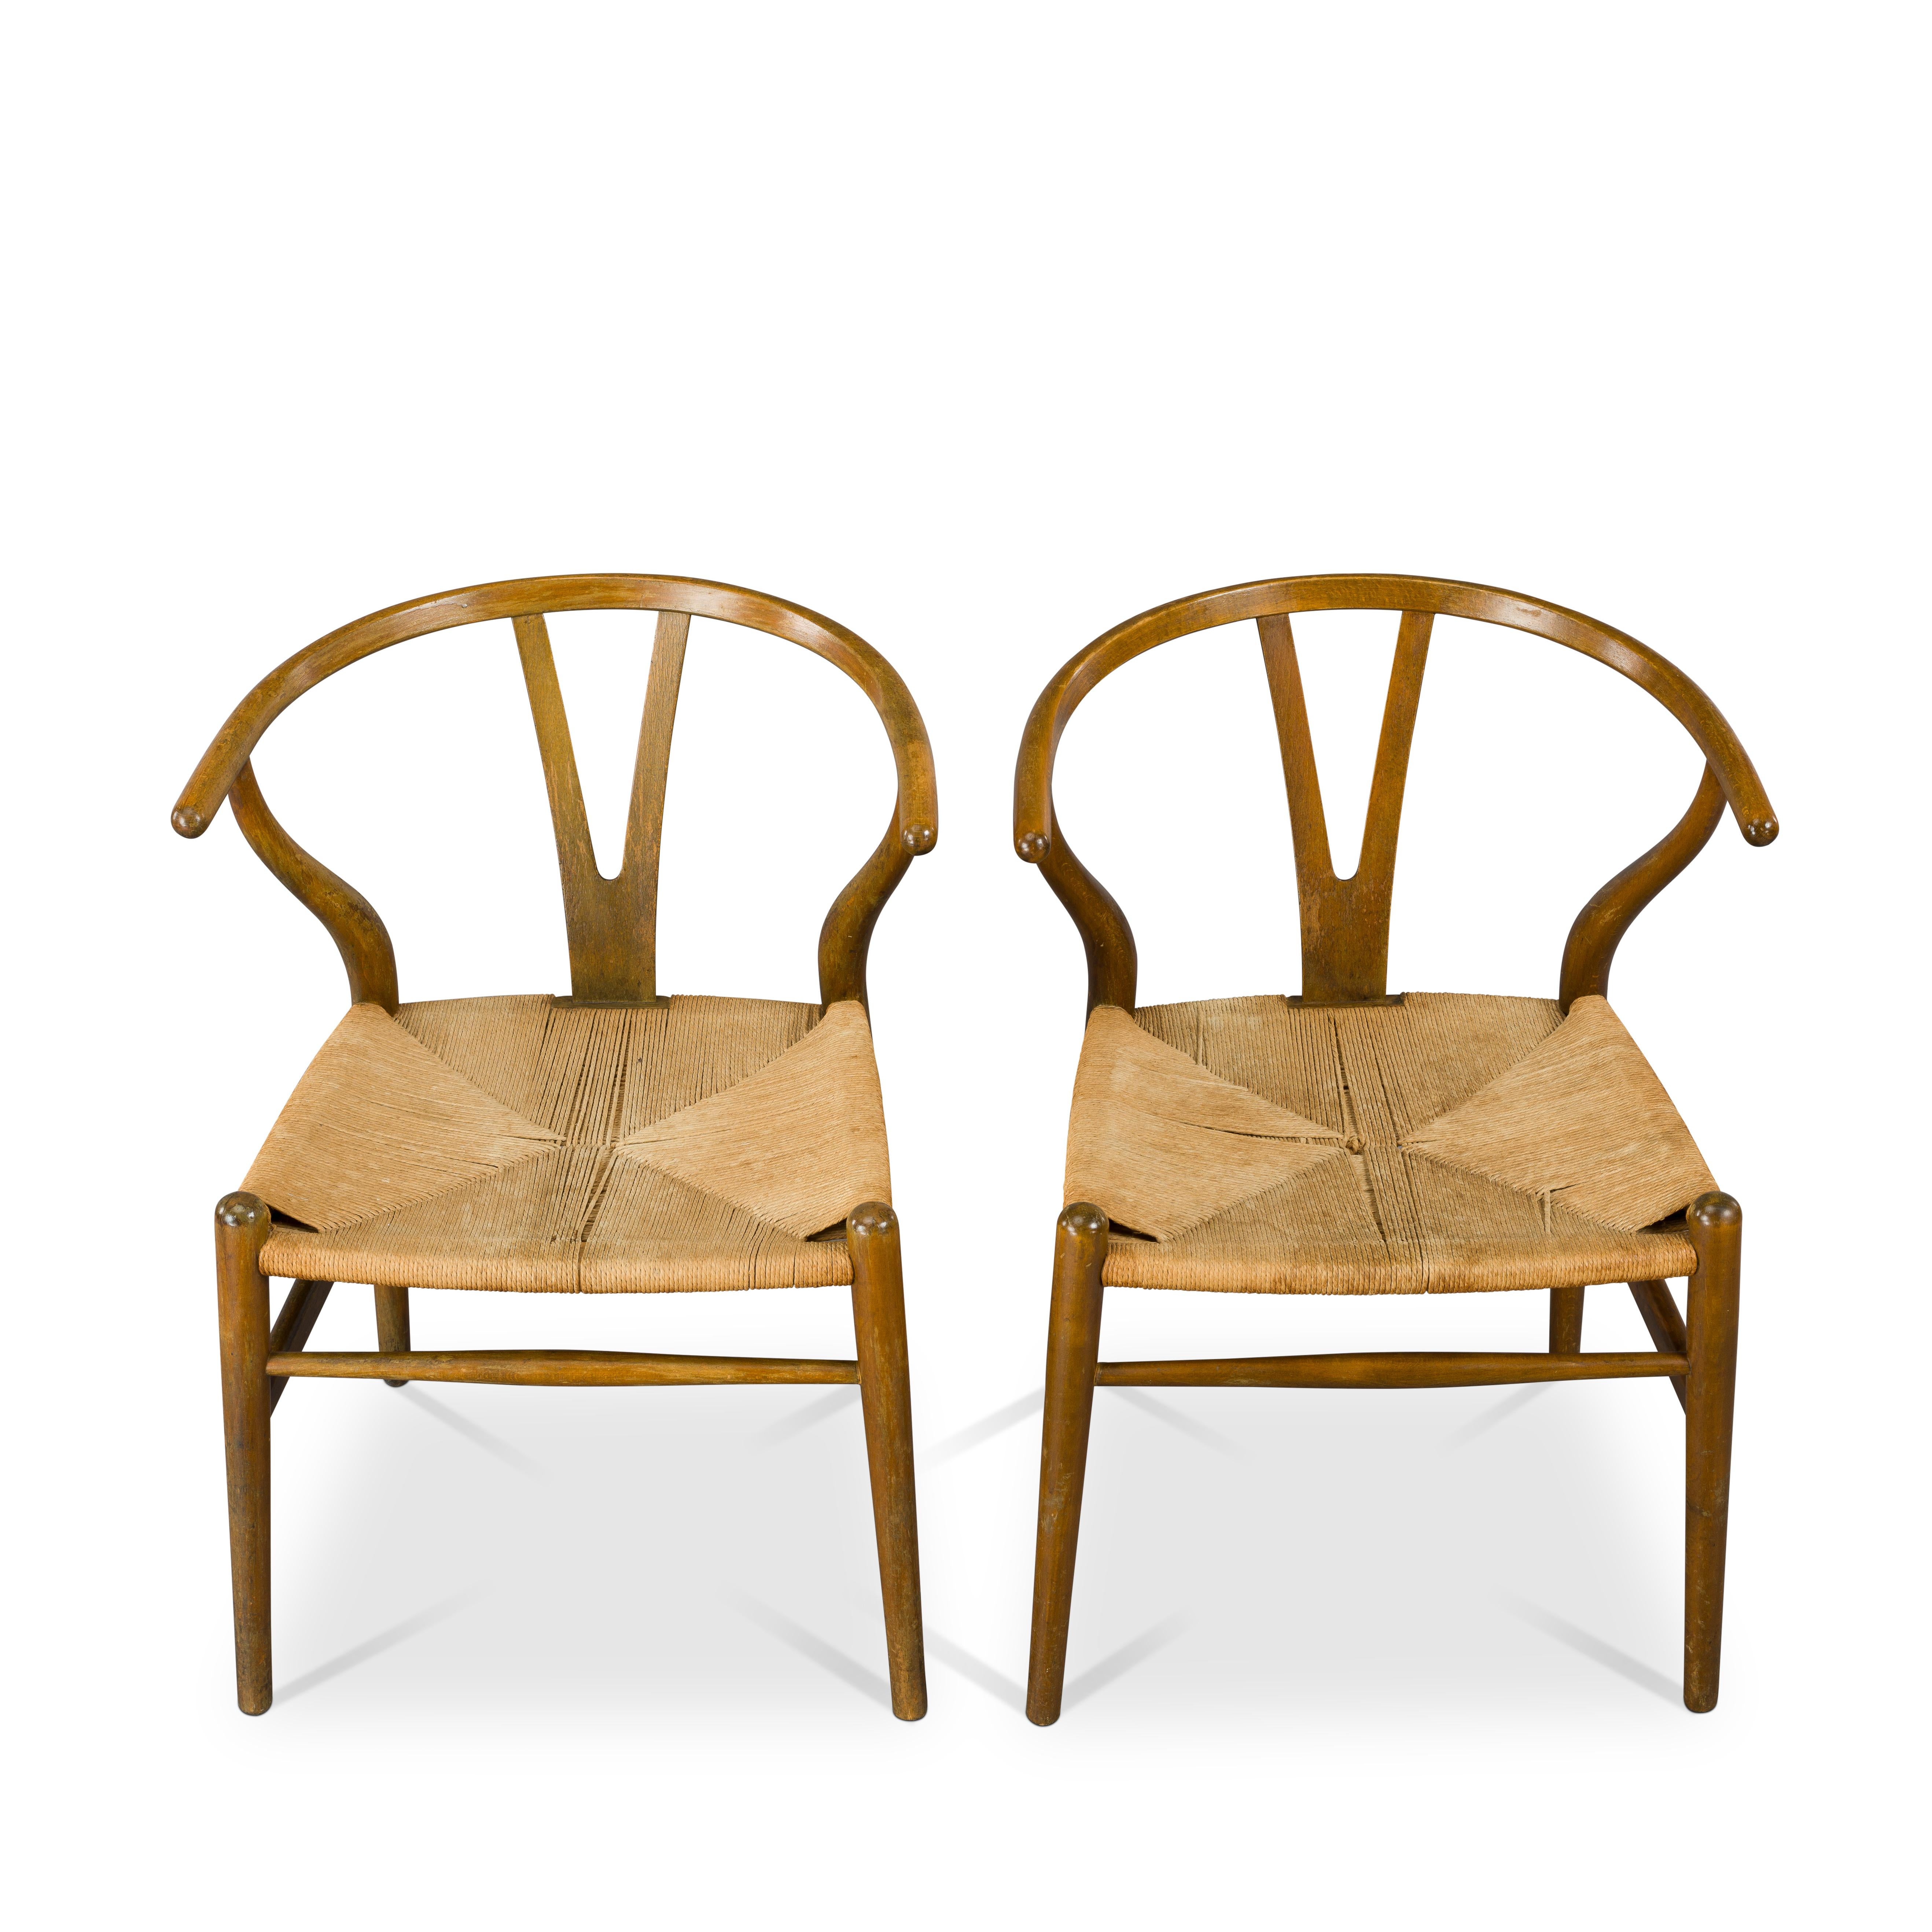 Leather Midcentury CH24 Wishbone Chairs by Hans J. Wegner for Carl Hansen & Søn Made in